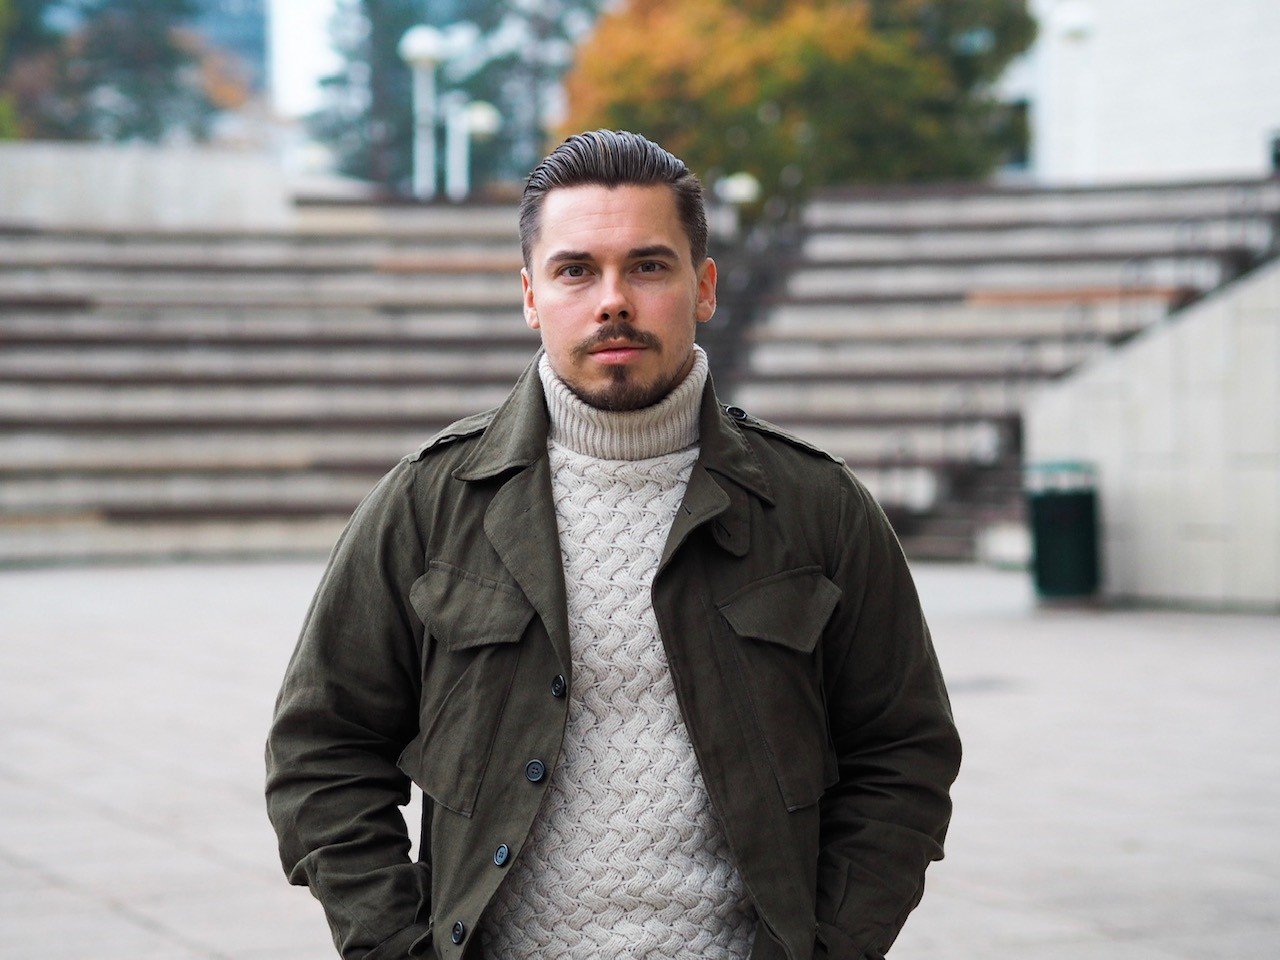 Outfit of the week - field jacket with a roll neck sweater and denim